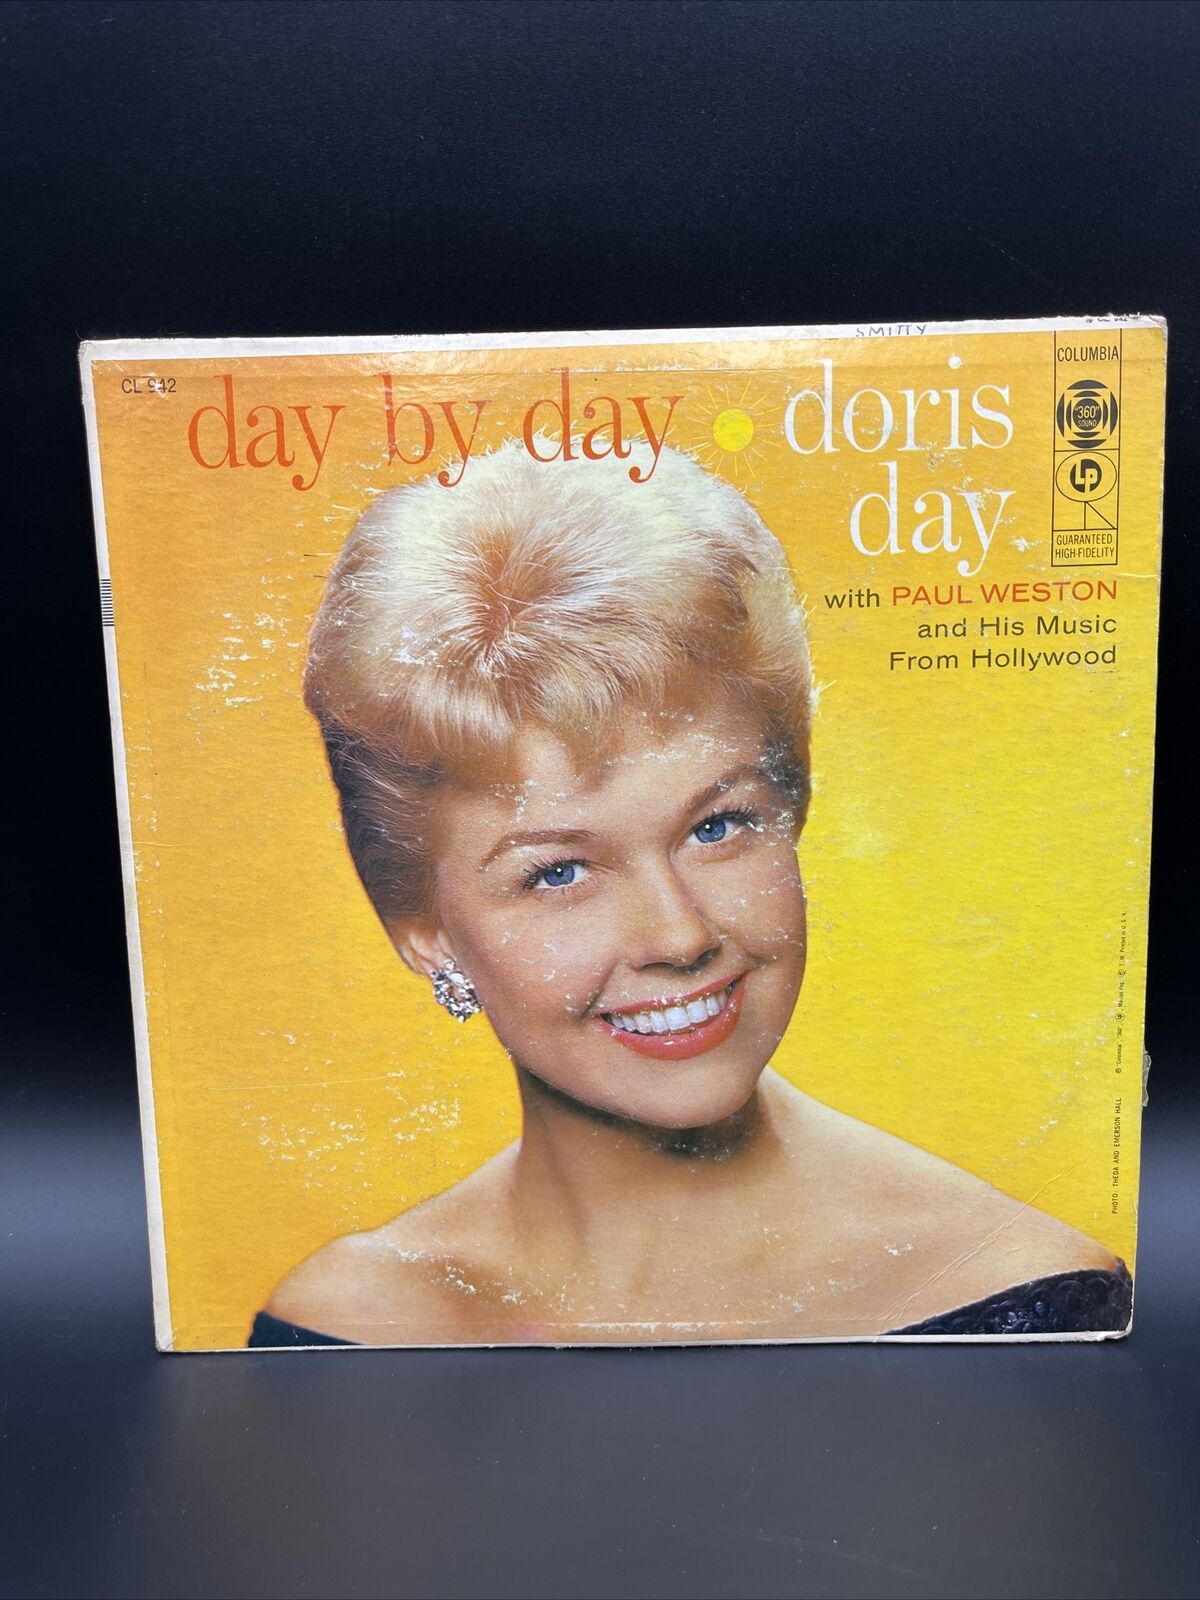 Day by Day Doris Day w/ Paul Weston and His Music from Hollywood LP Vinyl Record